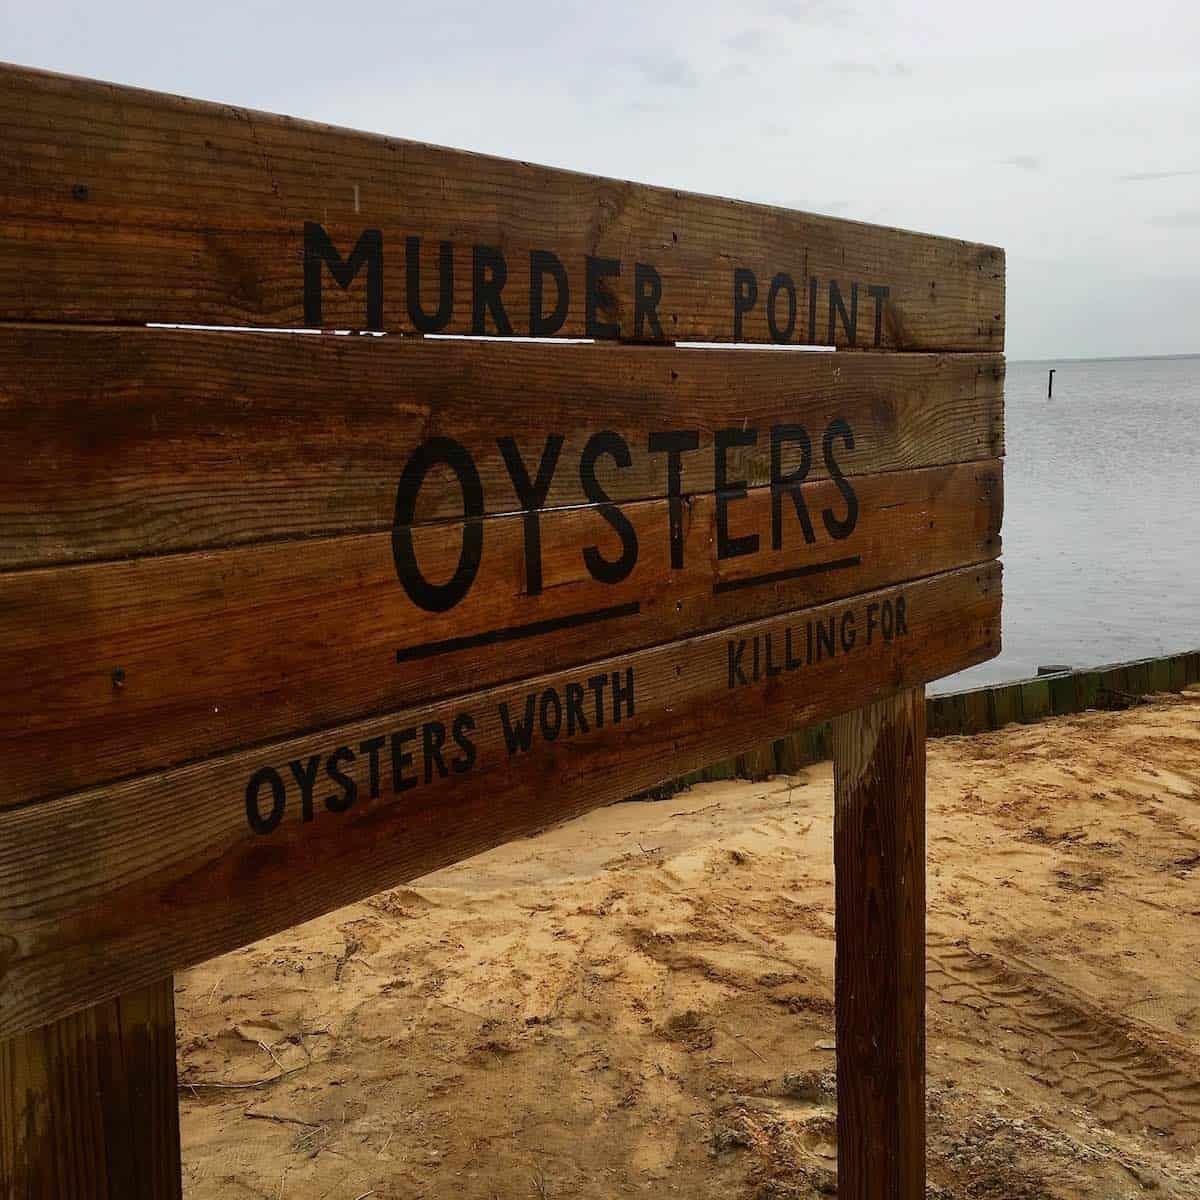 Murder Point Oyster sign.